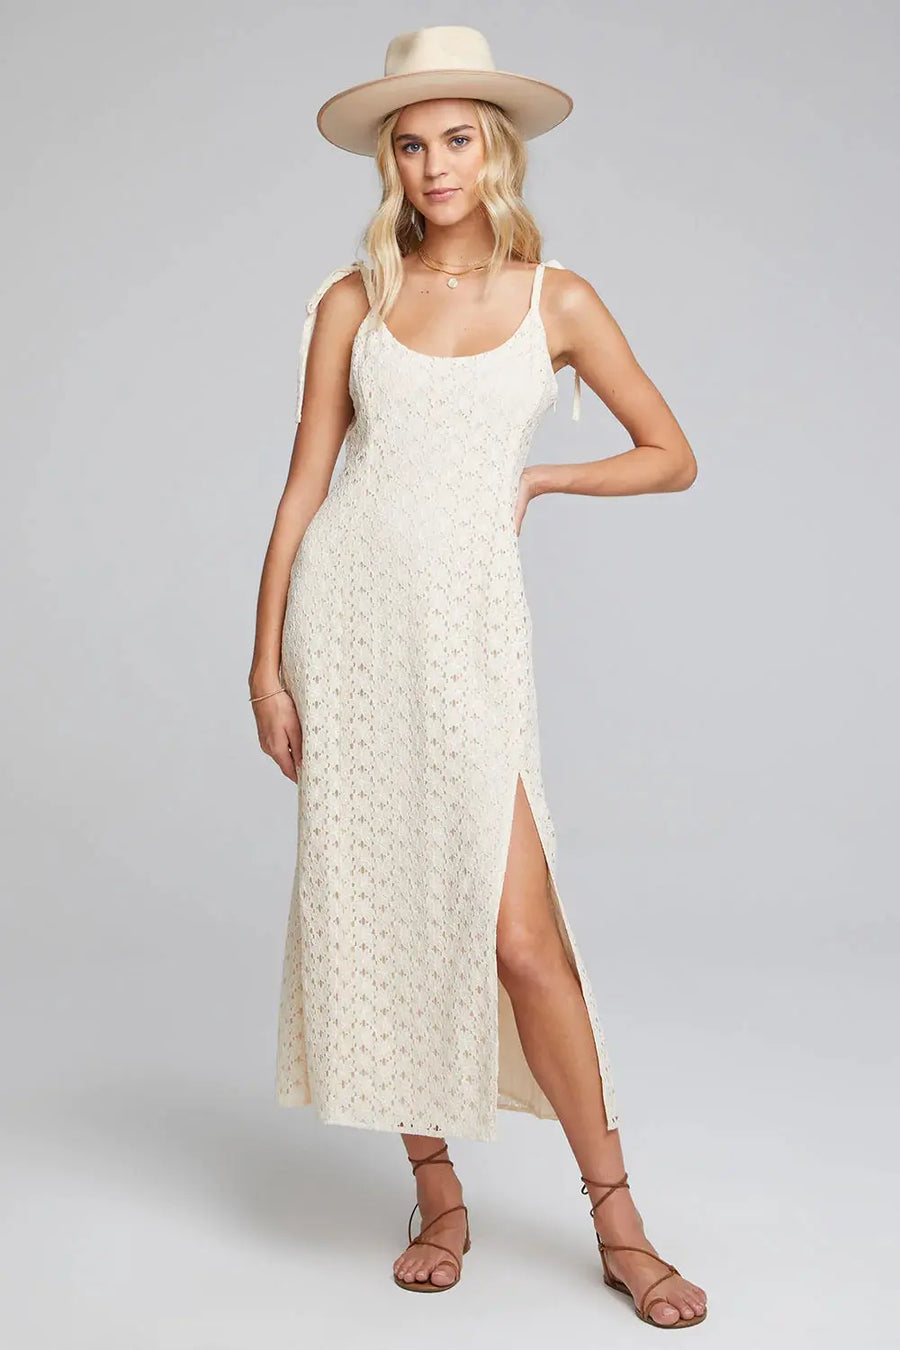 The Alanya Maxi Dress by Saltwater Luxe – THE SKINNY